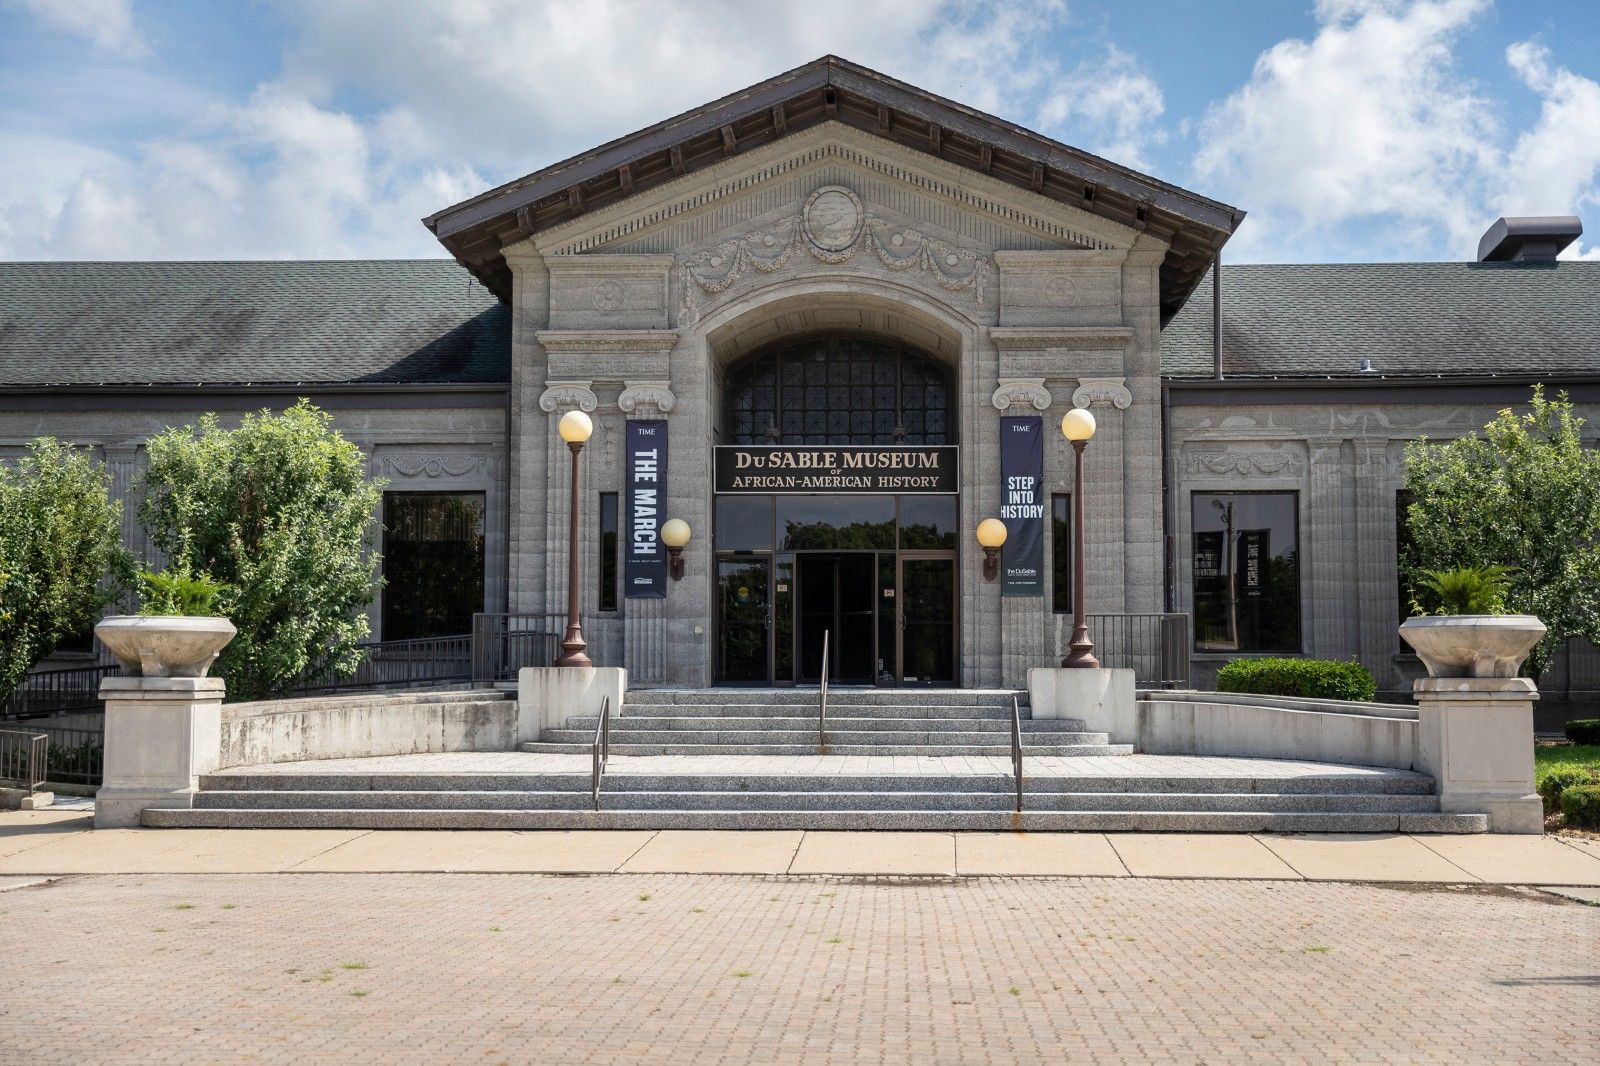 Views of Chicago’s DuSable Museum of African American History on July 22, 2020, as it stands empty due to COVID-19 closures. Image by Manuel Martinez / WBEZ. United States, 2020.